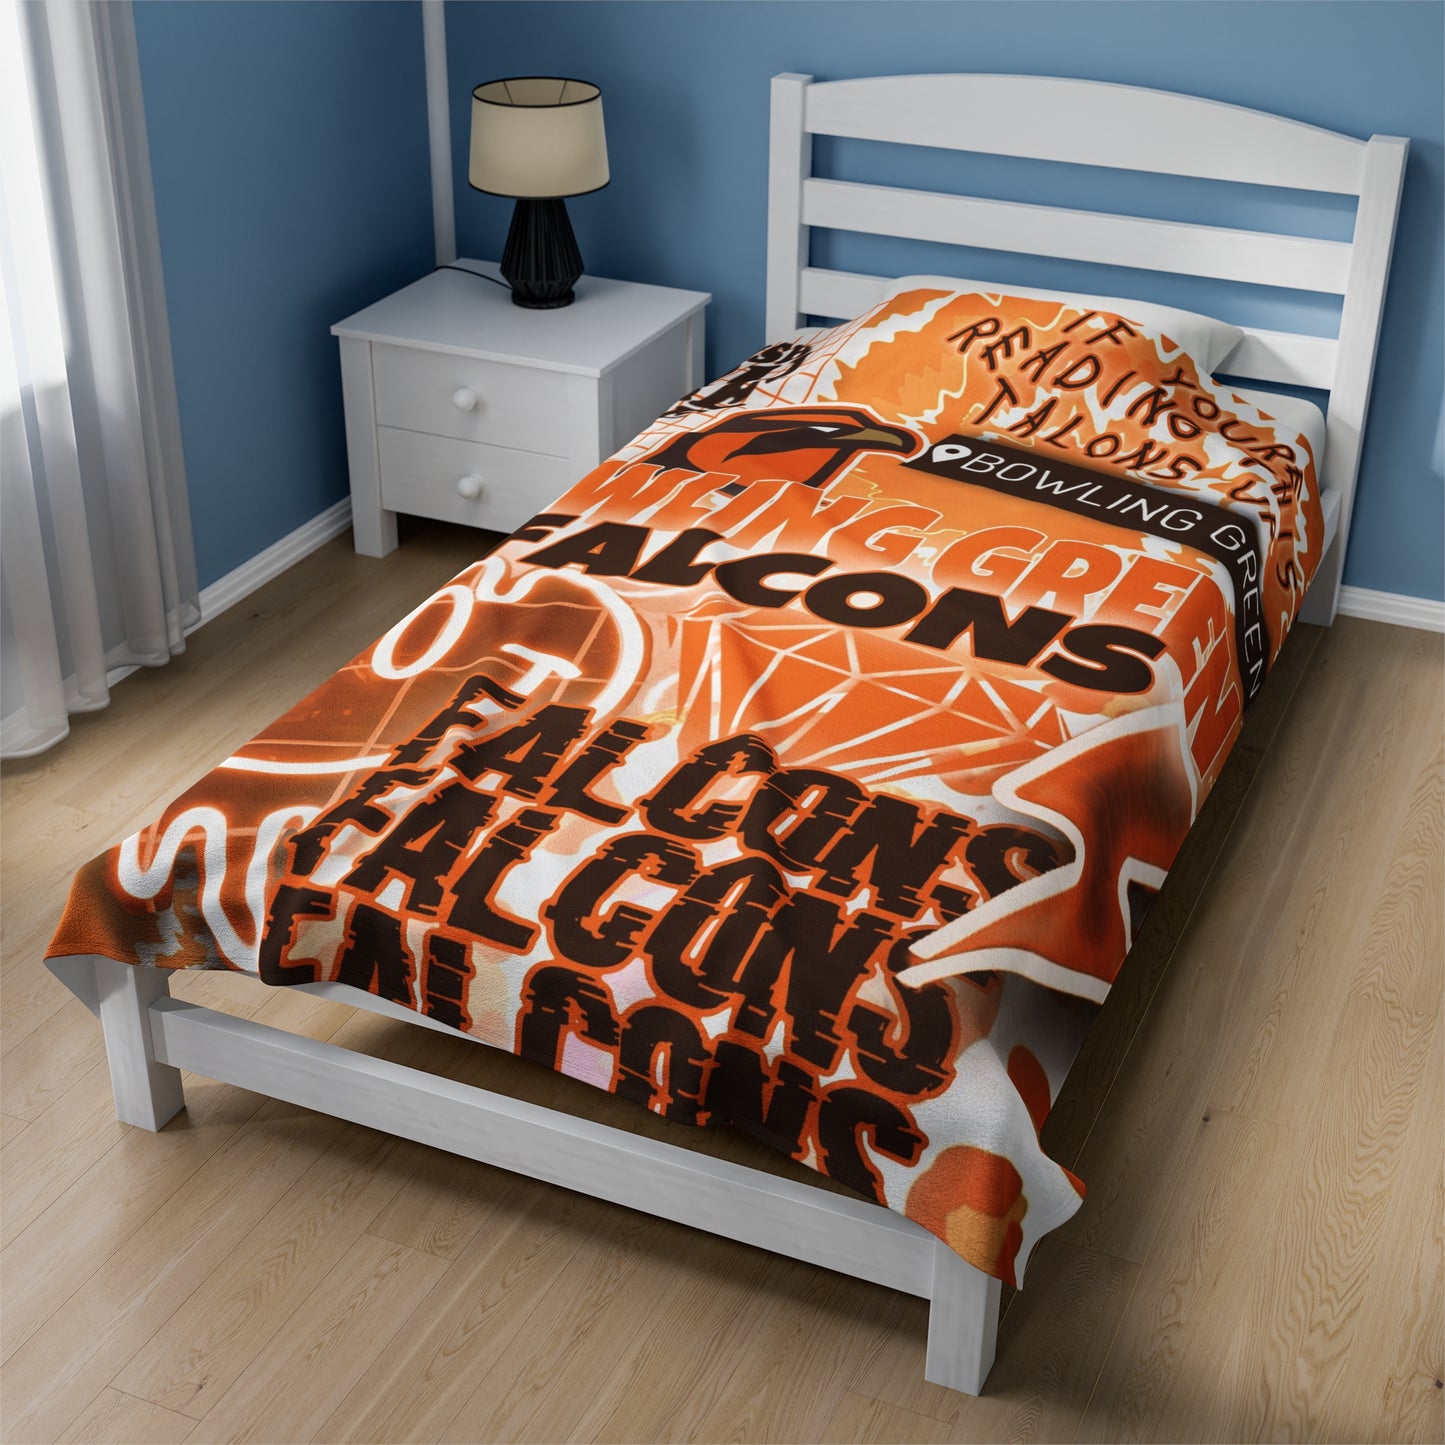 Bowling Green State University College Blanket